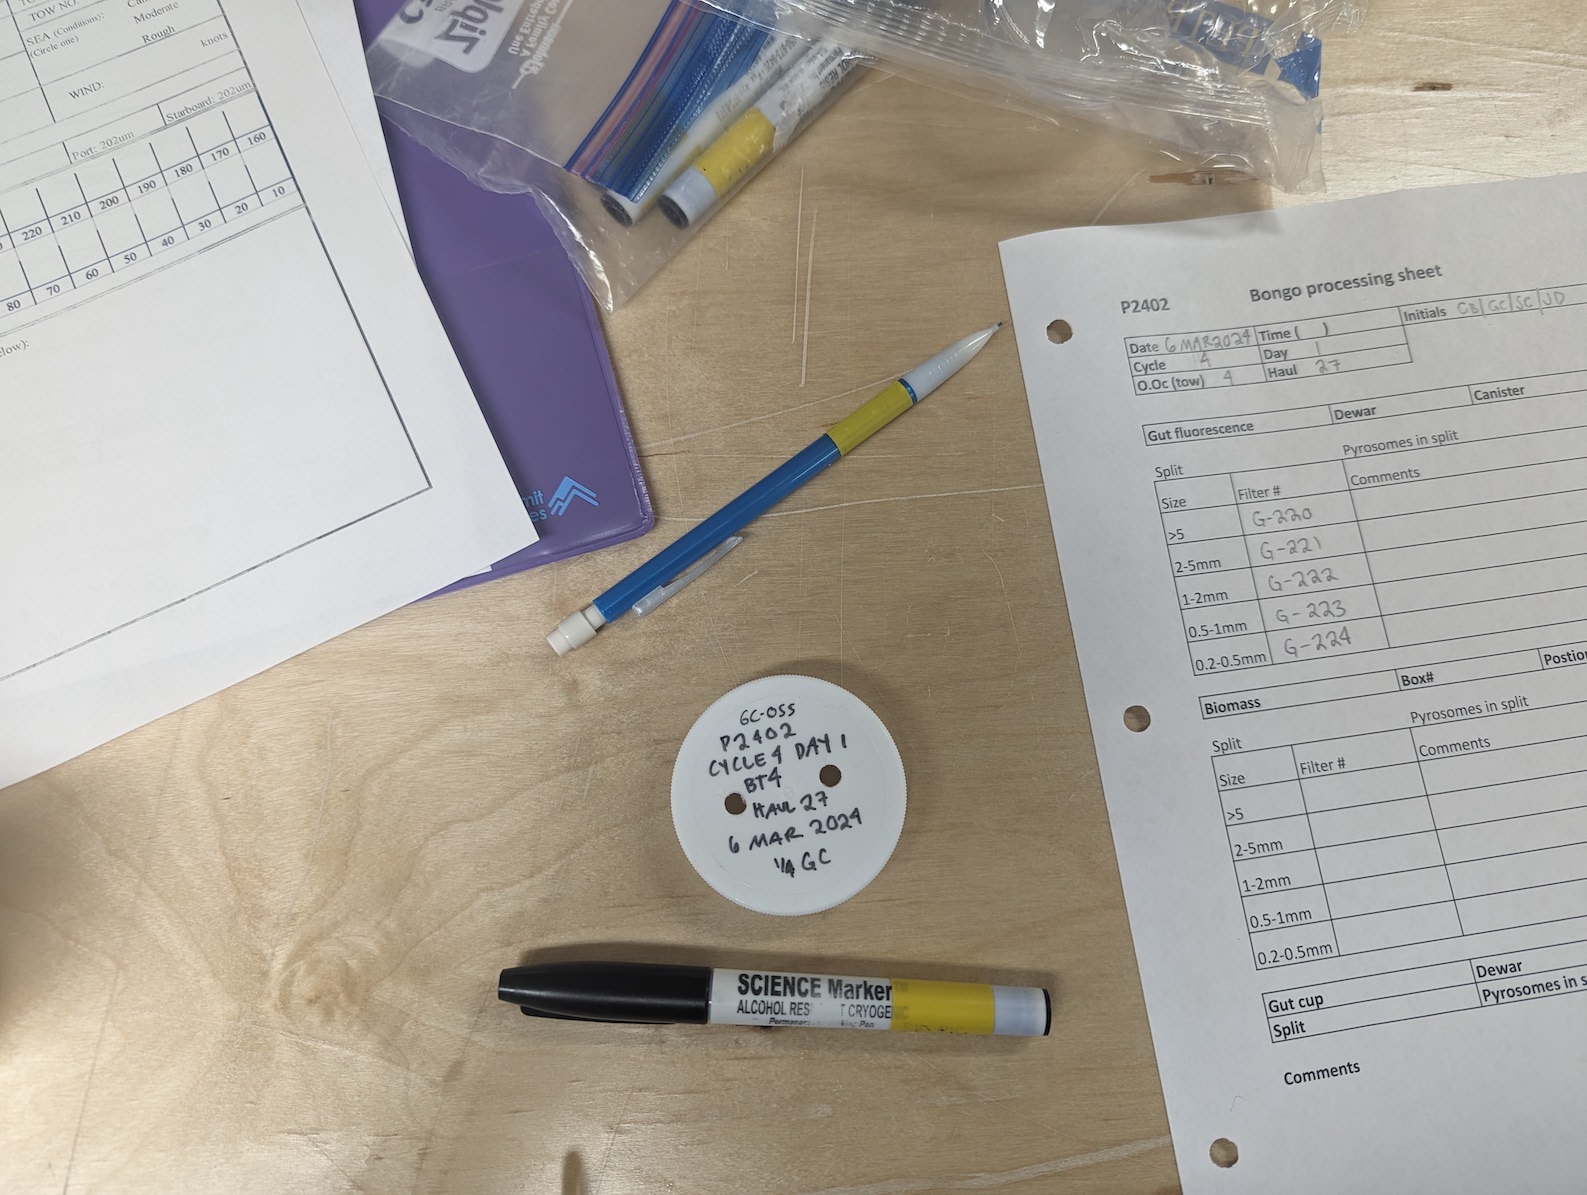 cryogenic marker next to a labeled lid, with worksheet filled out in the background detailing labelled petri dishes.